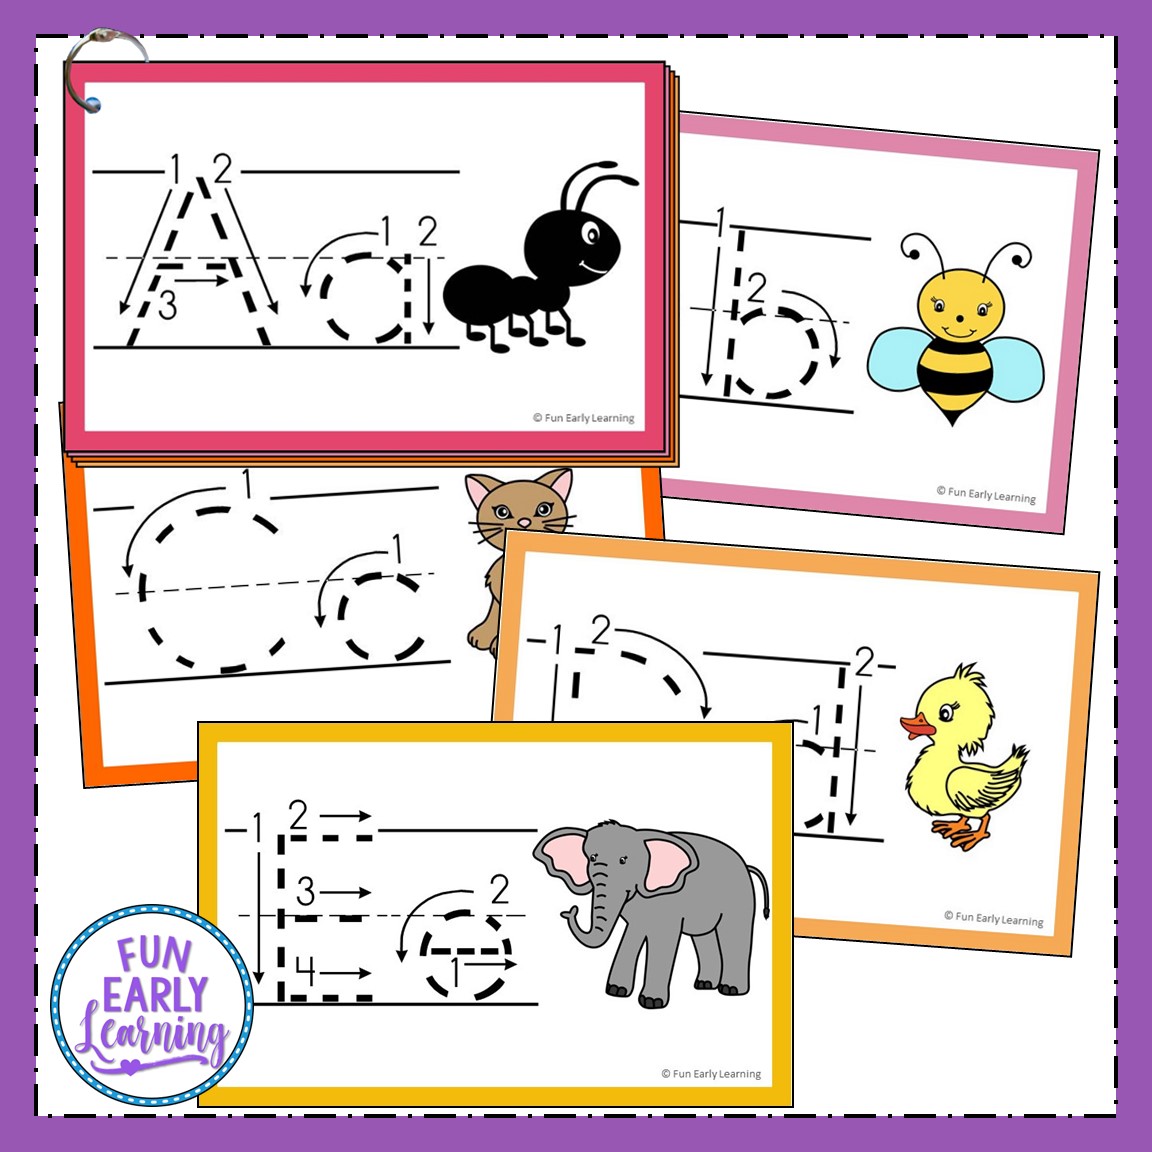 Teach Letters and Writing with our Free Alphabet Animal Tracing Cards